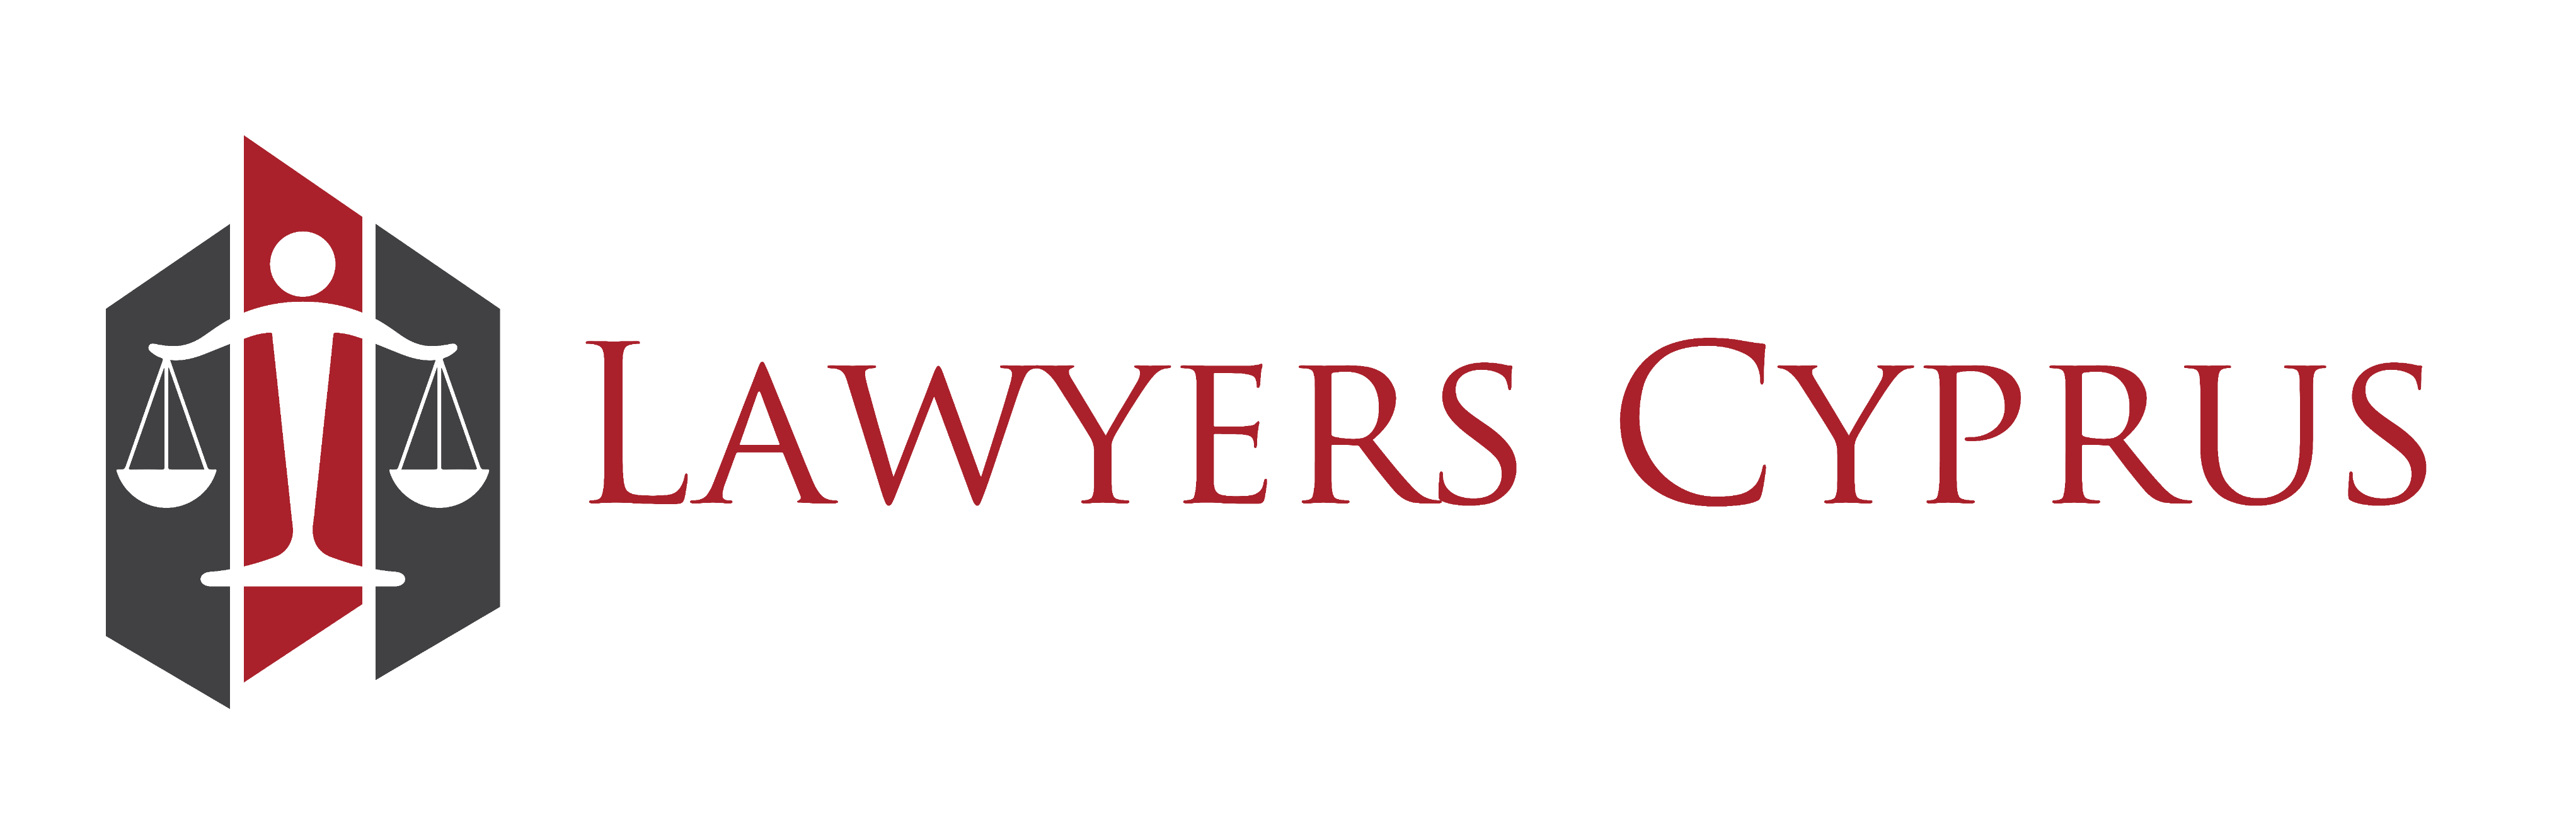 Lawyers in Cyprus